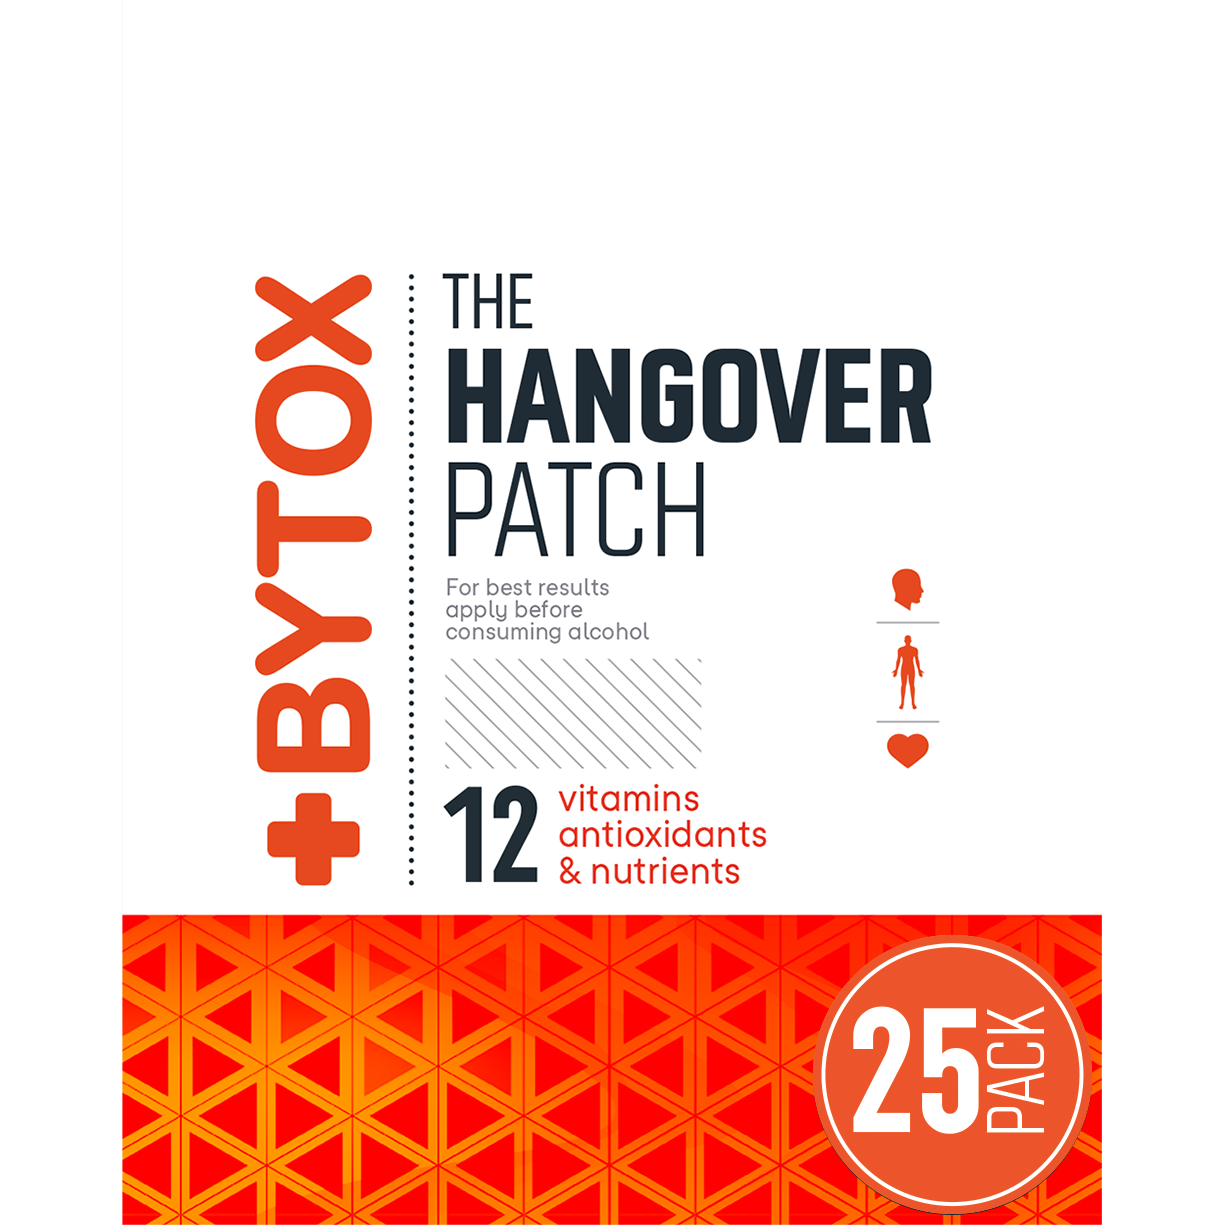 Bytox Hangover Patch Products, 3819 votes - Shop & Review